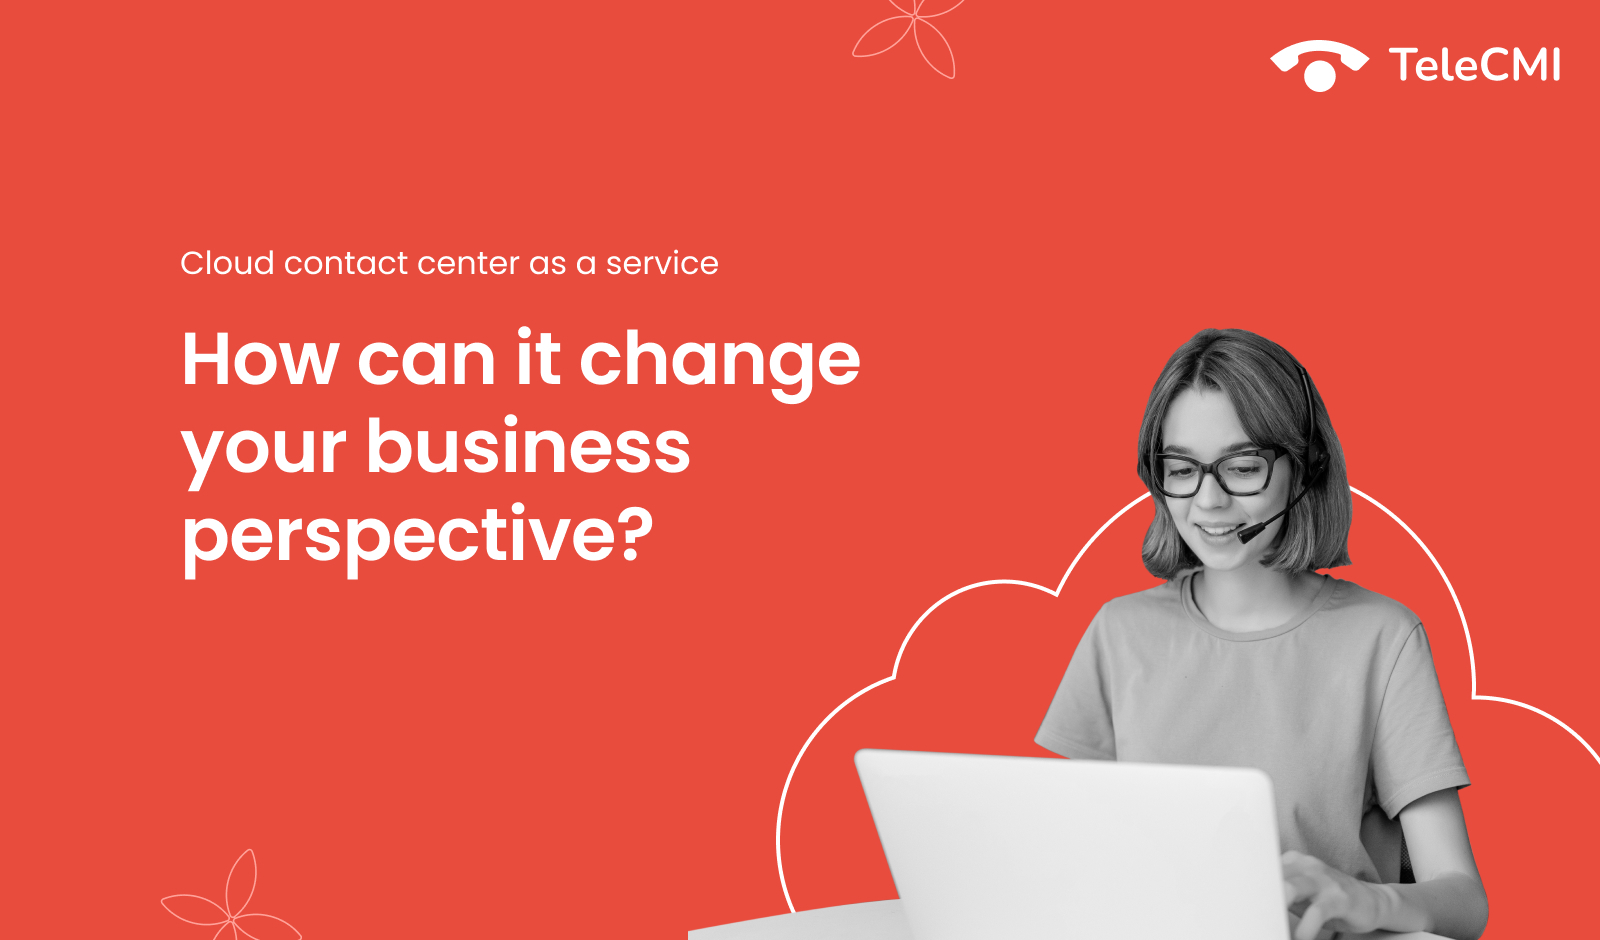 Cloud Contact Center as a Service: How can it
            change your business perspective?